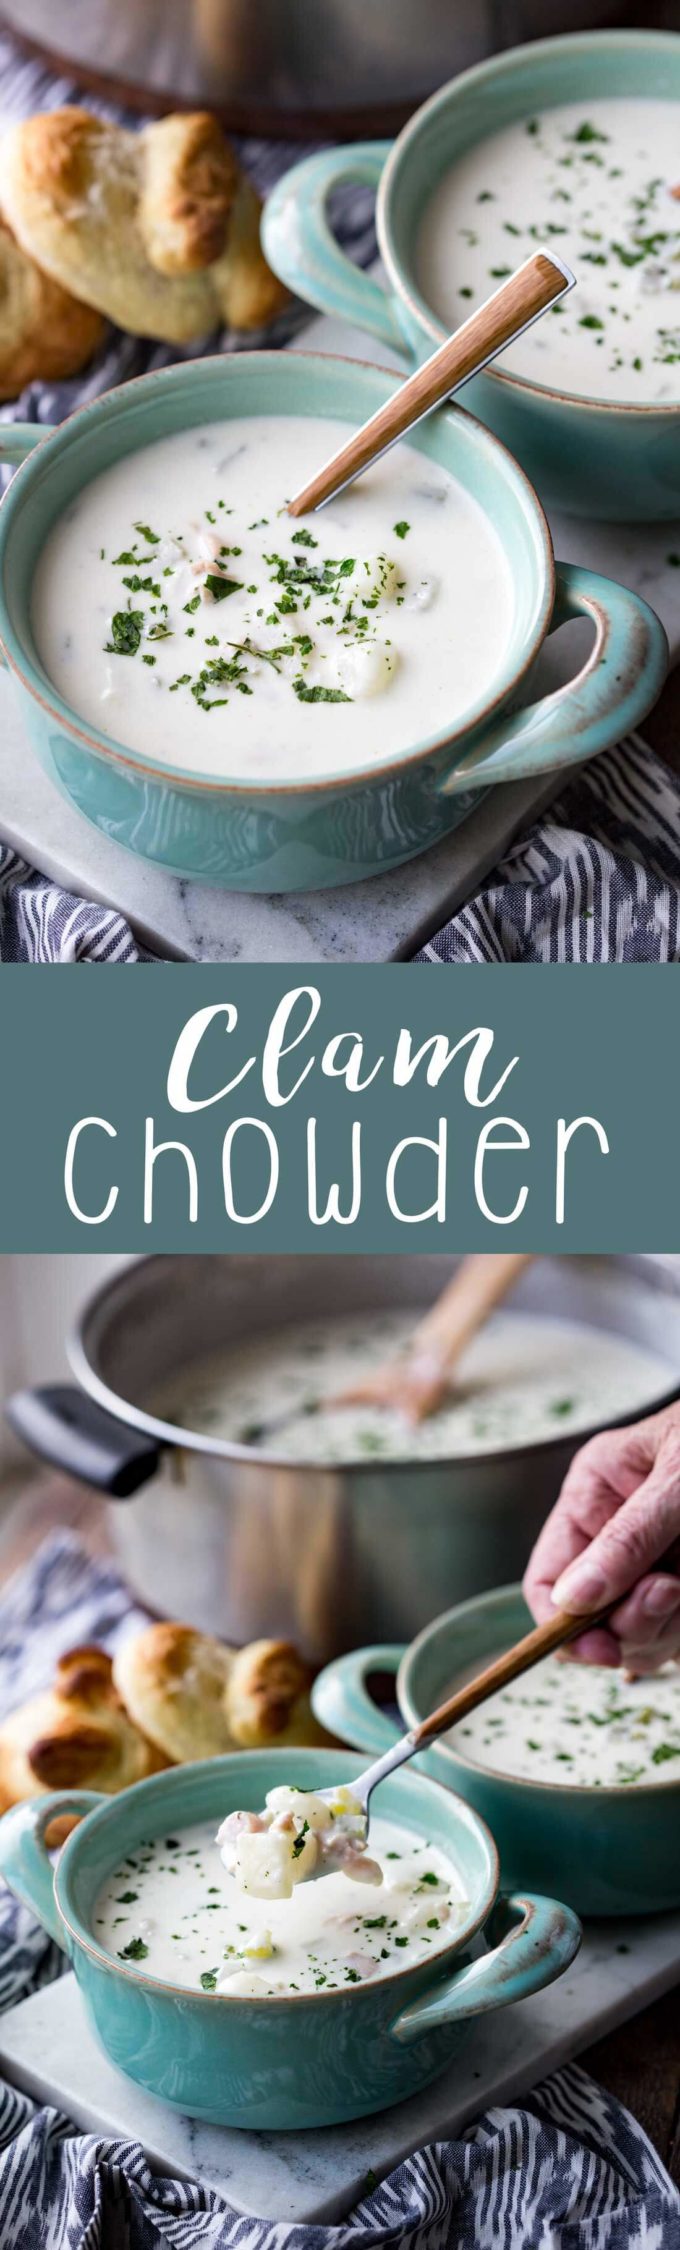 Creamy clam chowder is a homemade chowder that is chockfull of clams, potatoes, celery and all good things. 